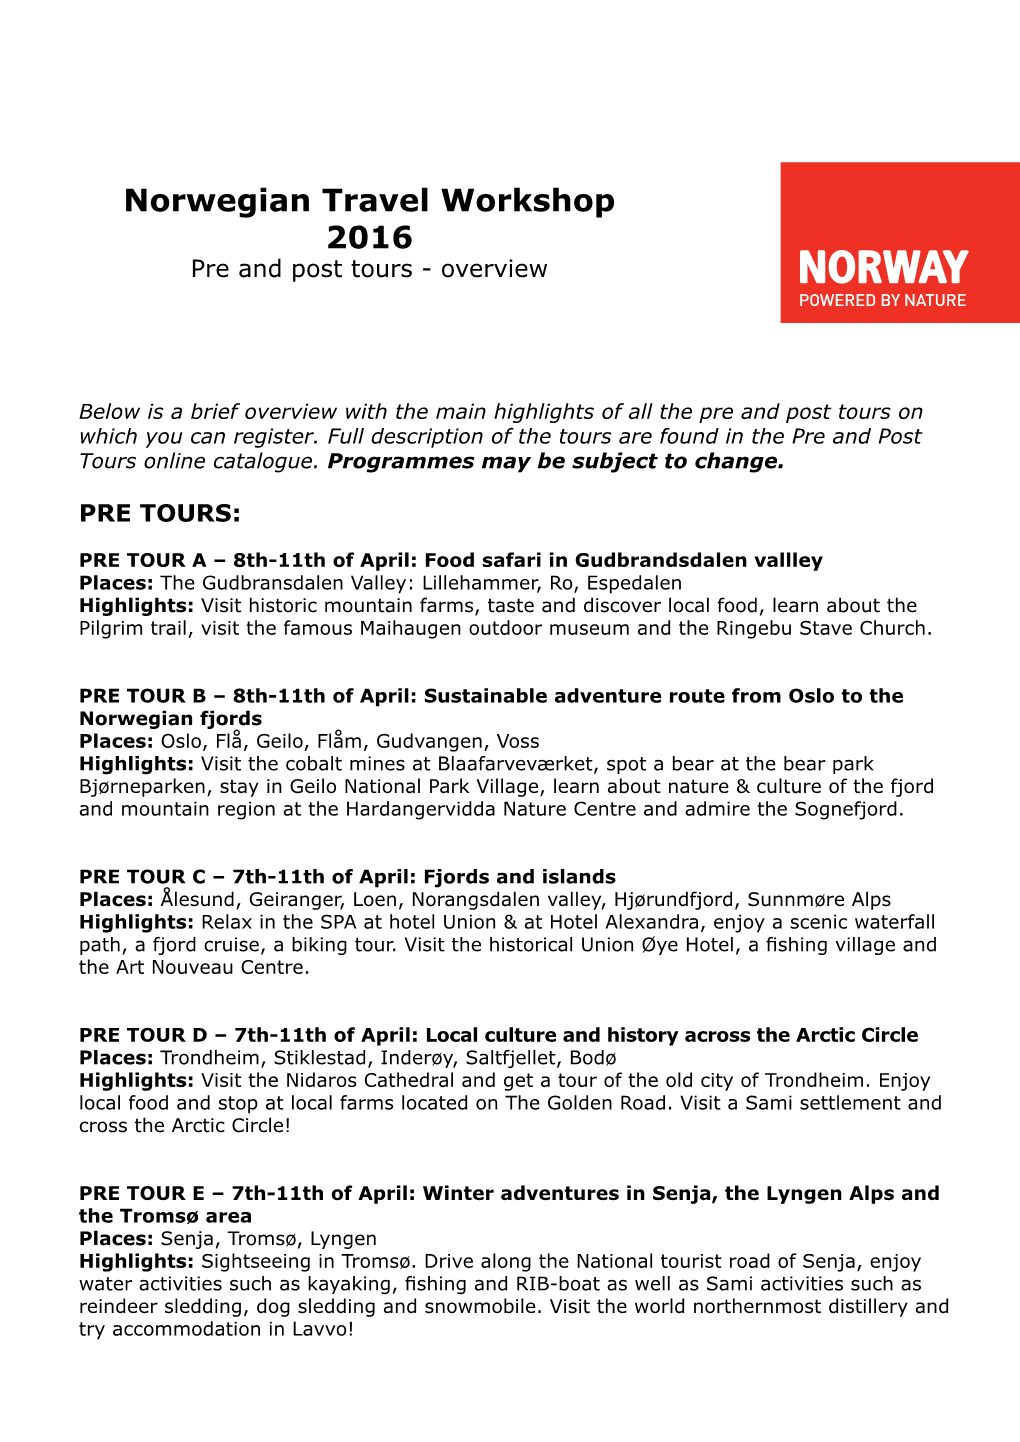 Norwegian Travel Workshop 2016 Pre and Post Tours - Overview